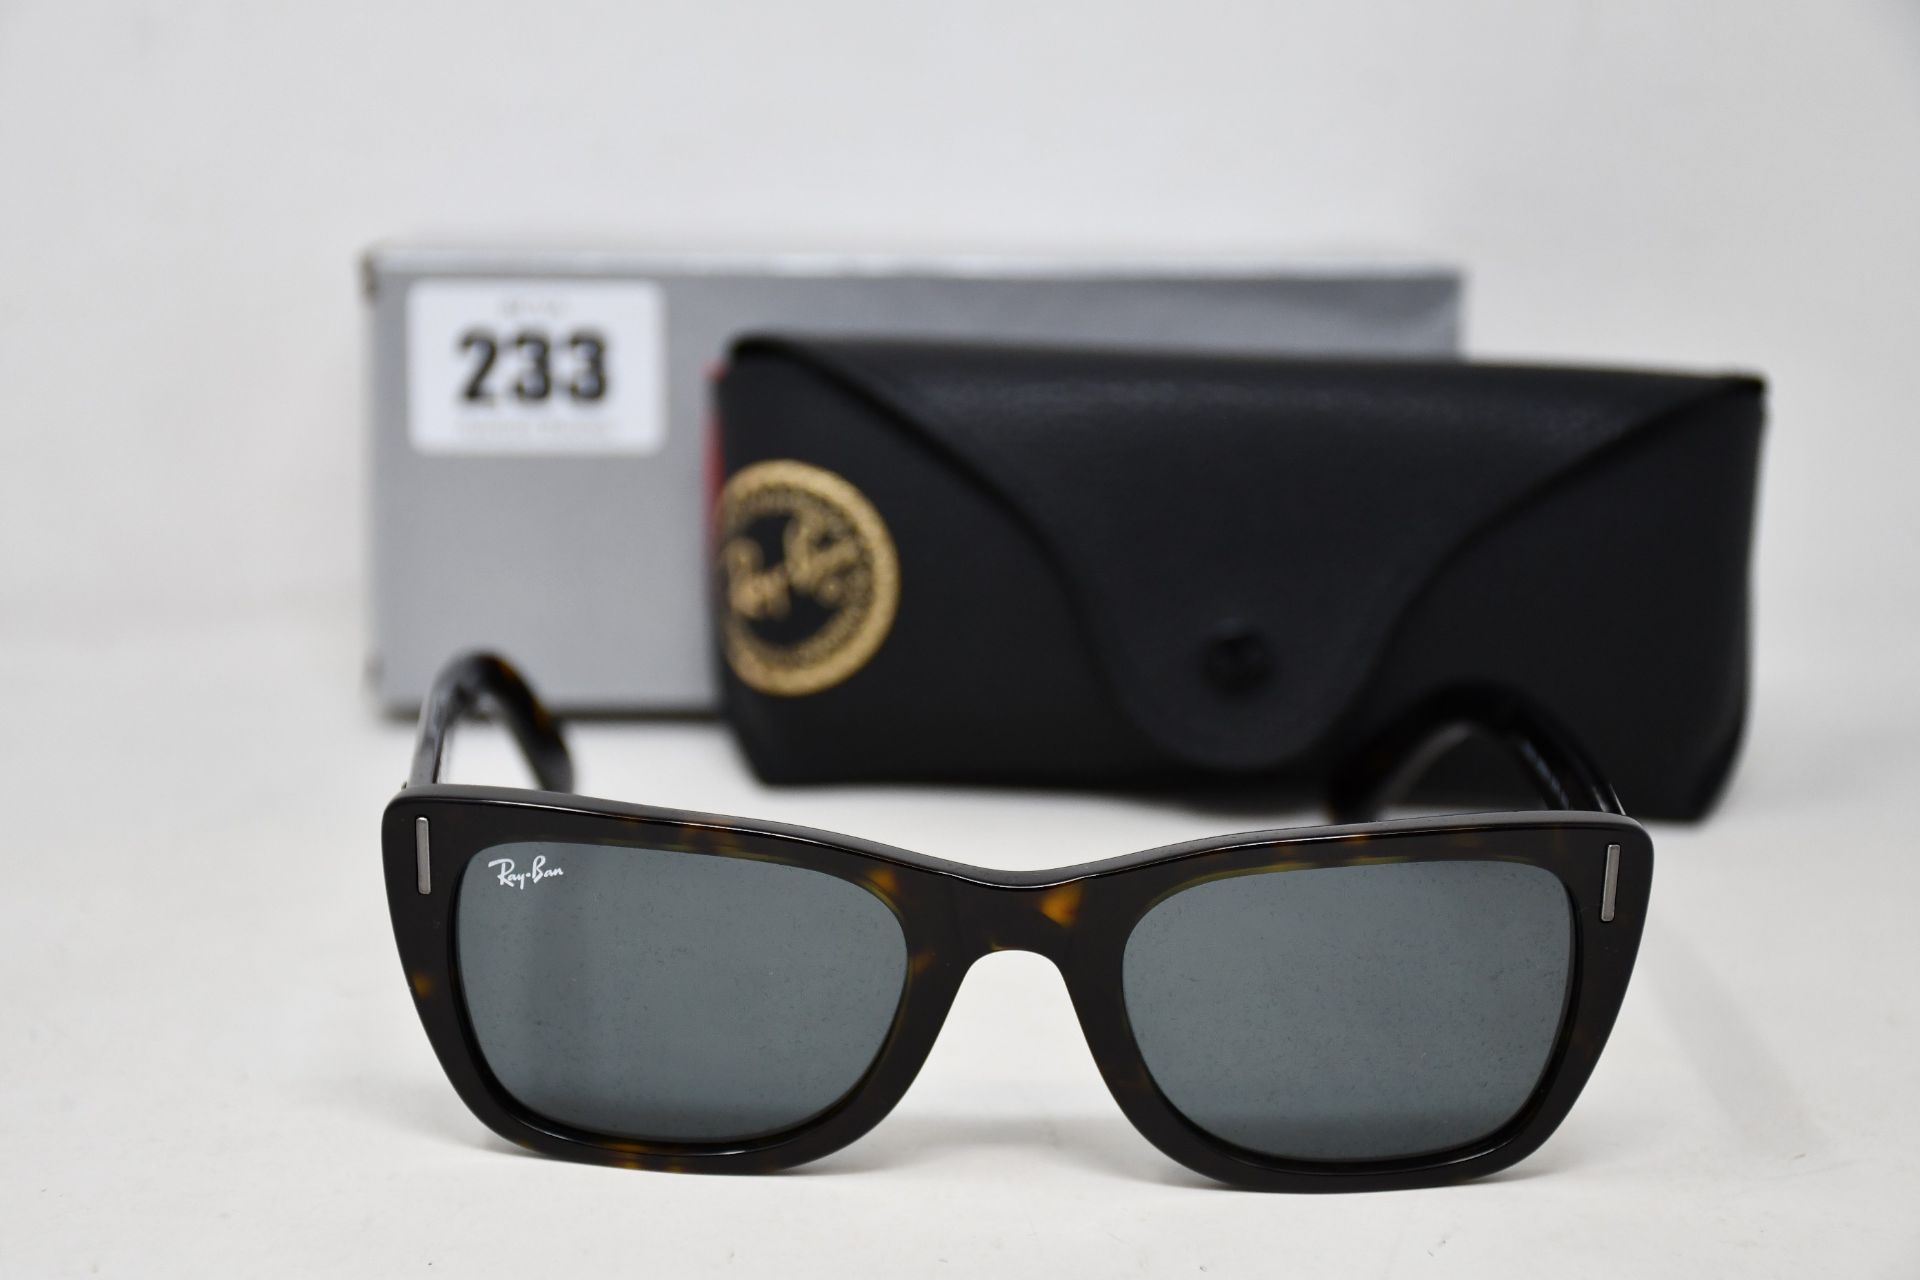 A pair of as new Ray Ban sunglasses.